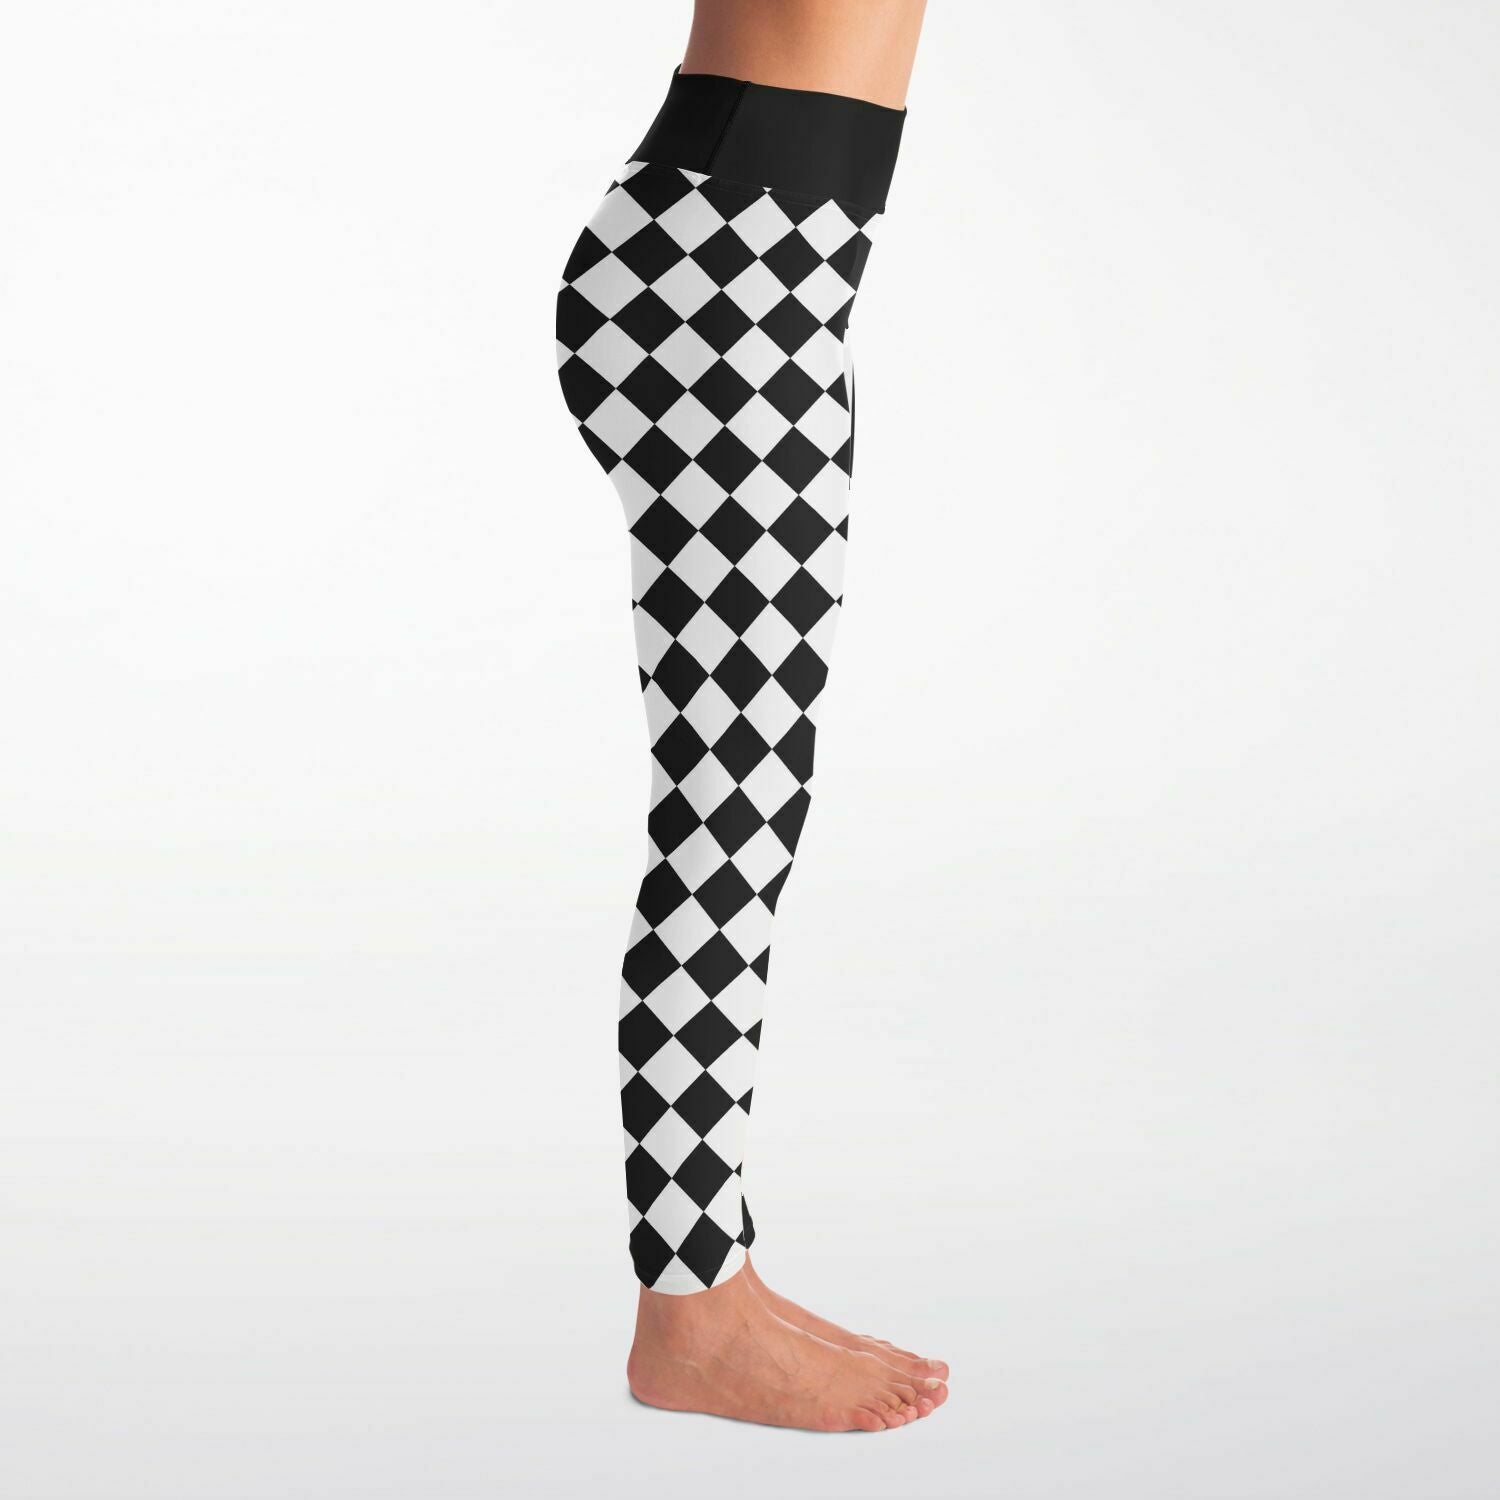 Clowning leggings with checkers and stripes for balloon twisters